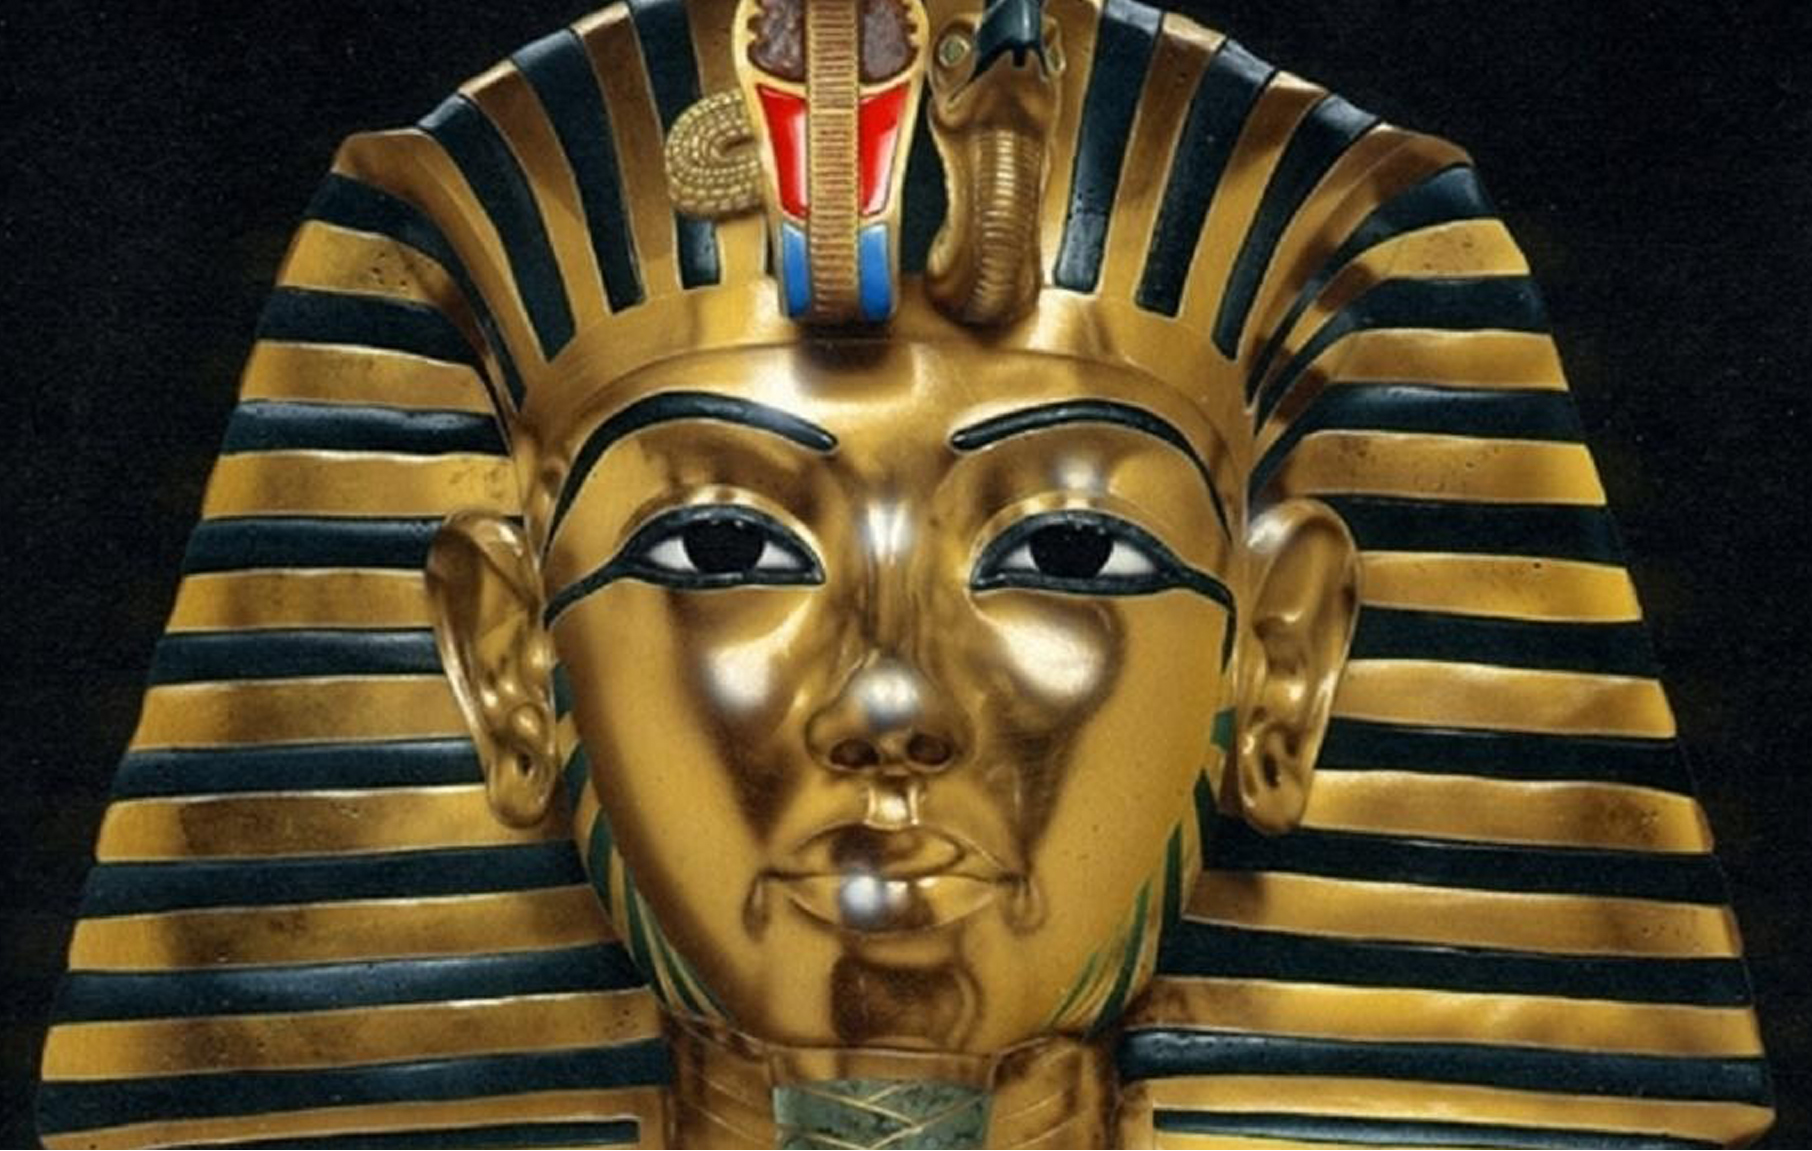 Cosmetics in Egypt: Rank and | The history writer blog